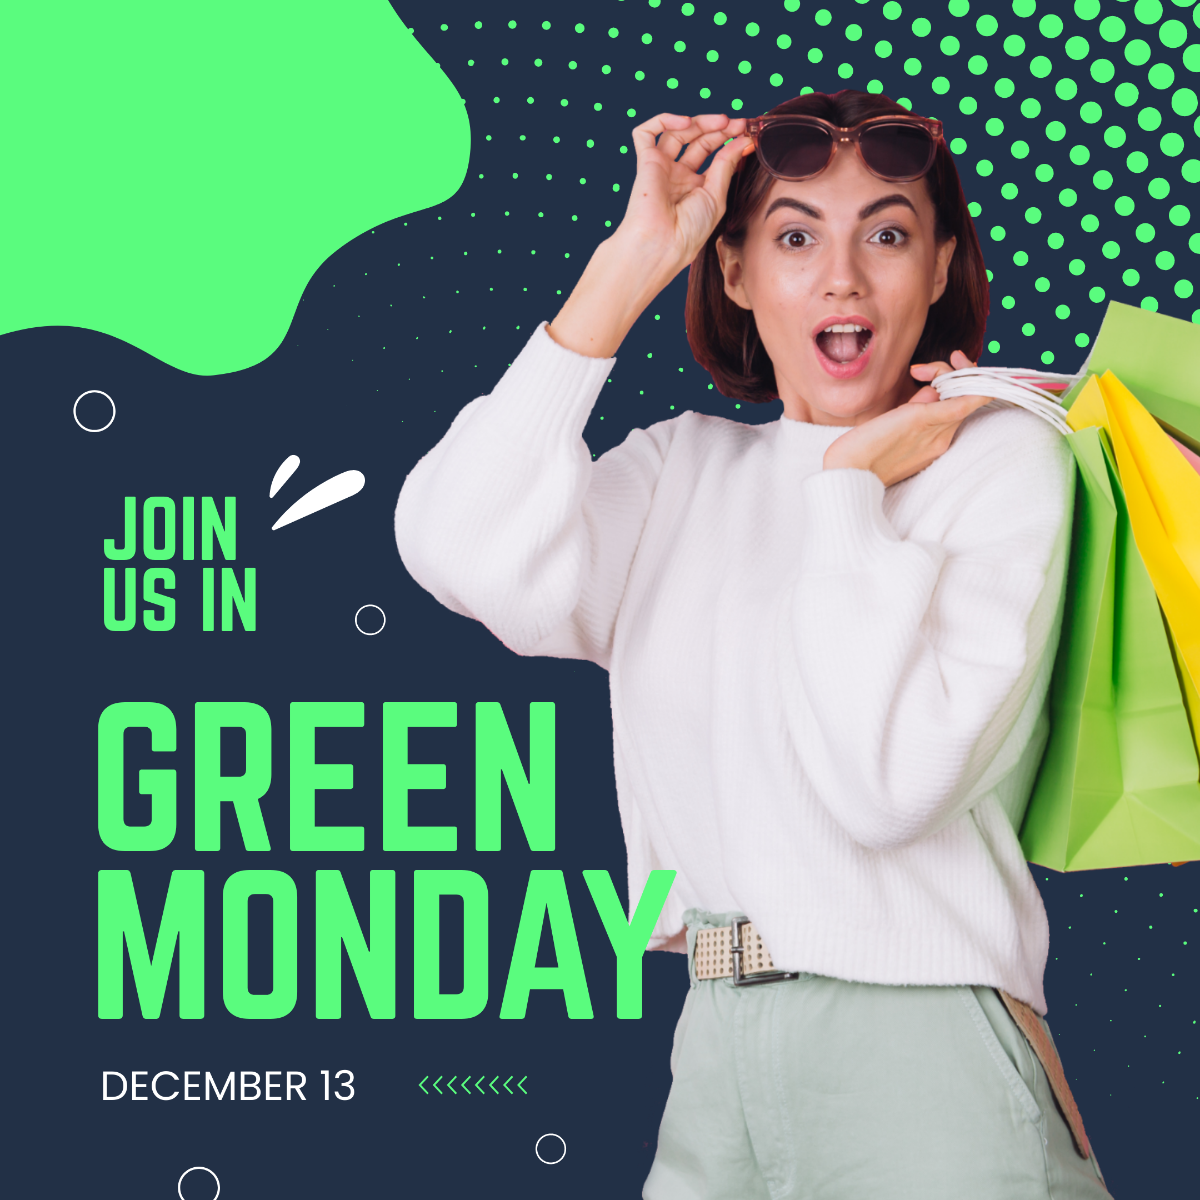 Free Green Monday Promotion Instagram Post Template